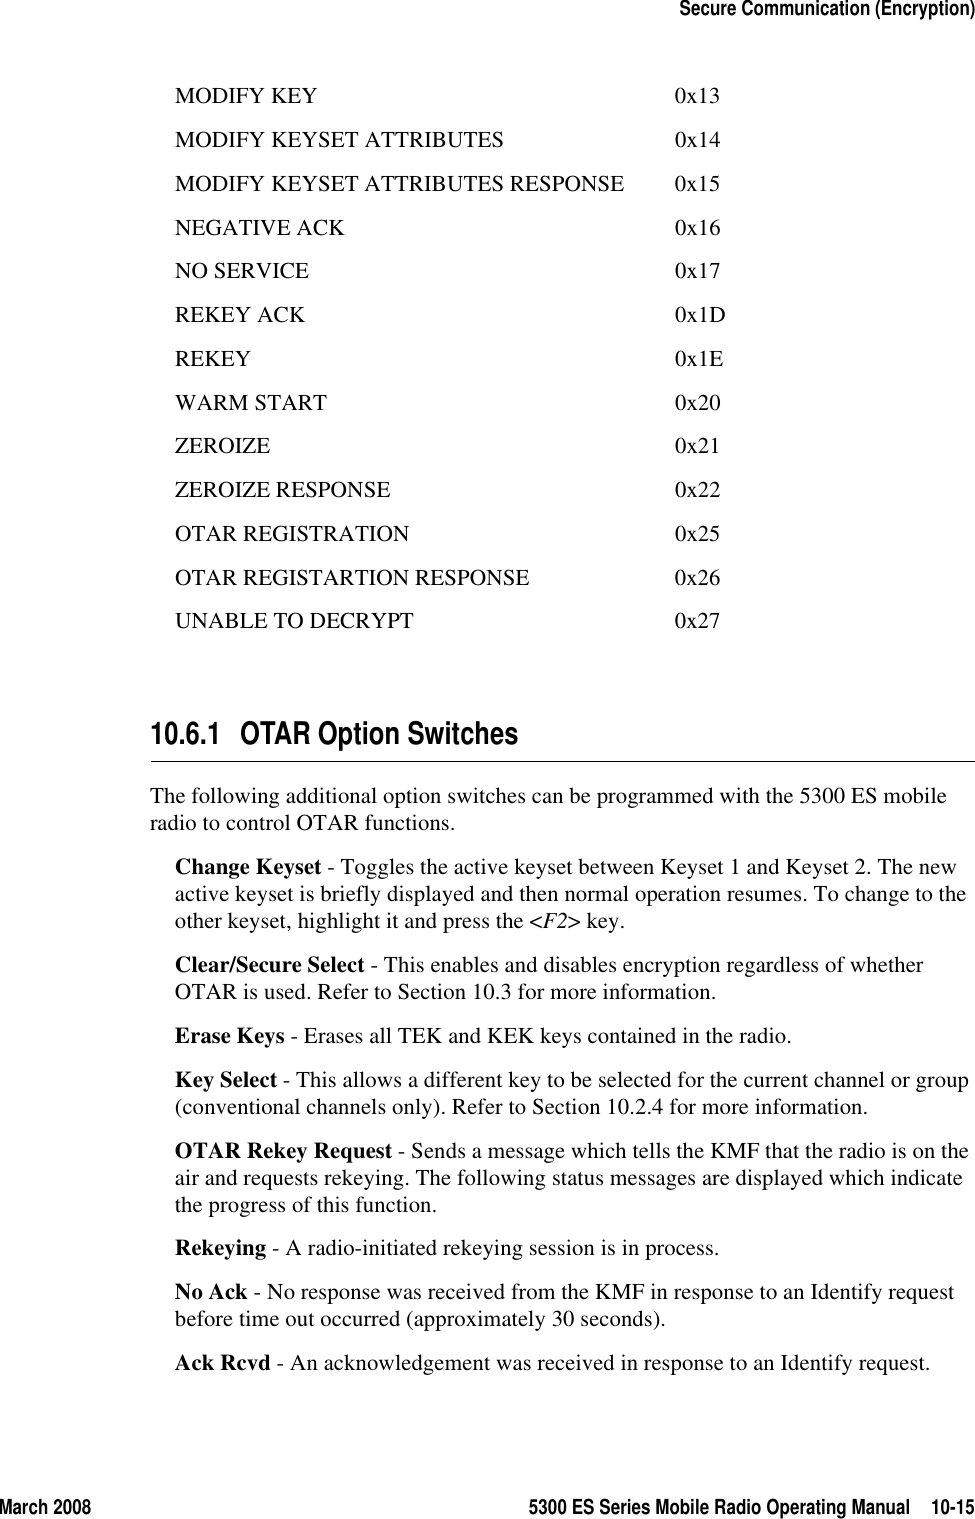 March 2008 5300 ES Series Mobile Radio Operating Manual 10-15Secure Communication (Encryption)MODIFY KEY 0x13MODIFY KEYSET ATTRIBUTES 0x14MODIFY KEYSET ATTRIBUTES RESPONSE 0x15NEGATIVE ACK 0x16NO SERVICE 0x17REKEY ACK 0x1DREKEY 0x1EWARM START 0x20ZEROIZE 0x21ZEROIZE RESPONSE 0x22OTAR REGISTRATION 0x25OTAR REGISTARTION RESPONSE 0x26UNABLE TO DECRYPT 0x2710.6.1 OTAR Option SwitchesThe following additional option switches can be programmed with the 5300 ES mobile radio to control OTAR functions.Change Keyset - Toggles the active keyset between Keyset 1 and Keyset 2. The new active keyset is briefly displayed and then normal operation resumes. To change to the other keyset, highlight it and press the &lt;F2&gt; key.Clear/Secure Select - This enables and disables encryption regardless of whether OTAR is used. Refer to Section 10.3 for more information.Erase Keys - Erases all TEK and KEK keys contained in the radio.Key Select - This allows a different key to be selected for the current channel or group (conventional channels only). Refer to Section 10.2.4 for more information.OTAR Rekey Request - Sends a message which tells the KMF that the radio is on the air and requests rekeying. The following status messages are displayed which indicate the progress of this function.Rekeying - A radio-initiated rekeying session is in process.No Ack - No response was received from the KMF in response to an Identify request before time out occurred (approximately 30 seconds).Ack Rcvd - An acknowledgement was received in response to an Identify request.